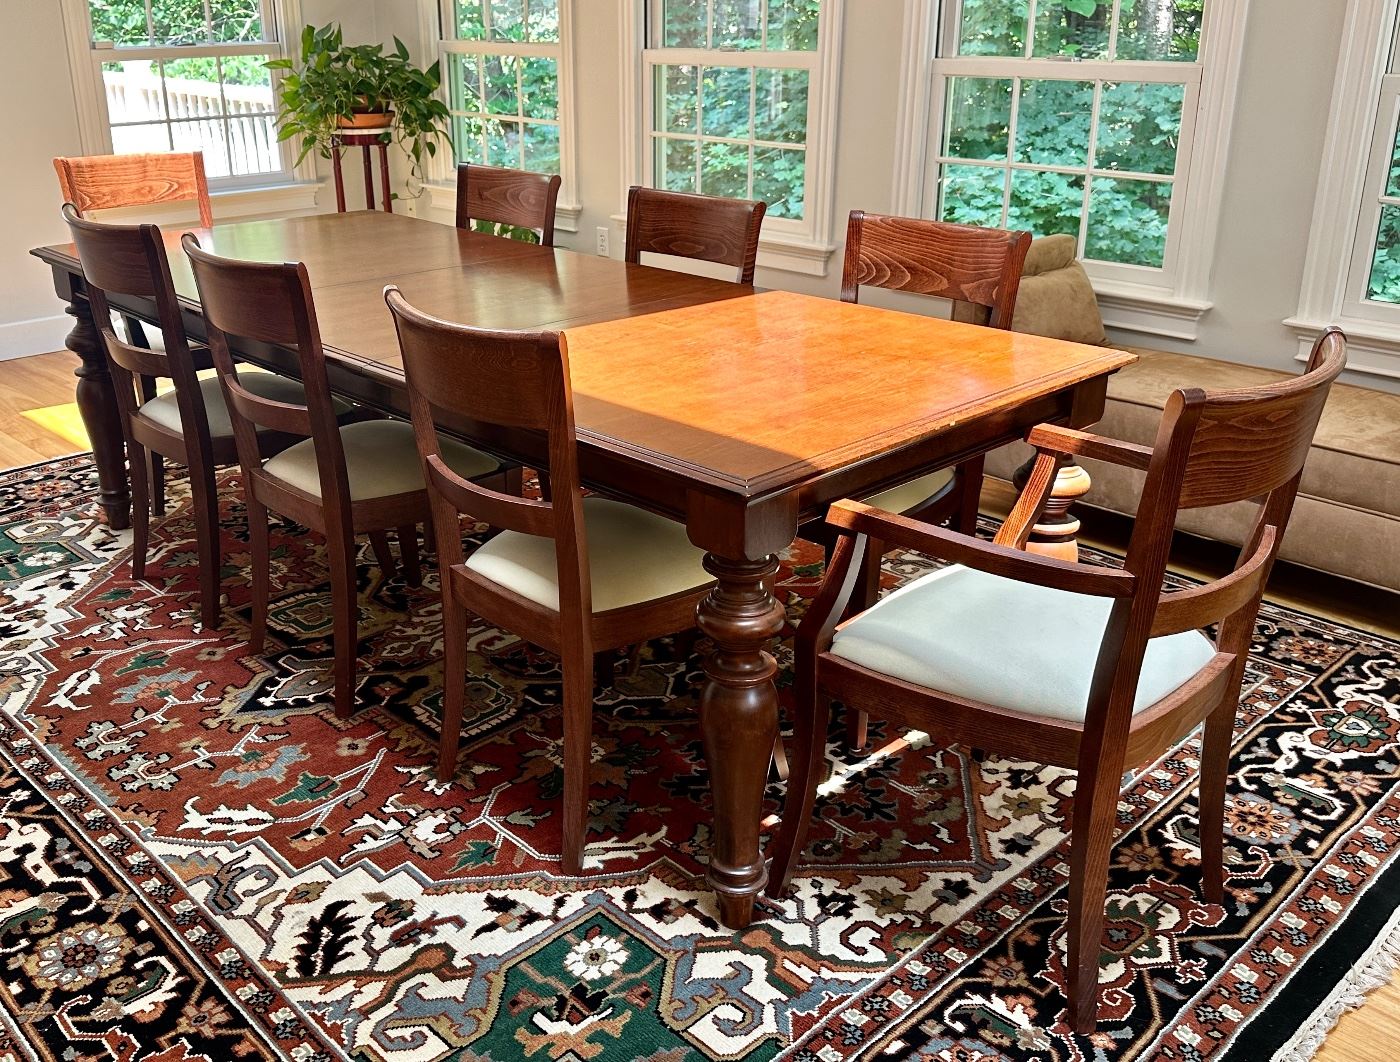 Restoration Hardware Dining Table and (8) Pottery Barn Chairs (The whole table is the darker wood - that is just the sun making it look like a different color on the right!)